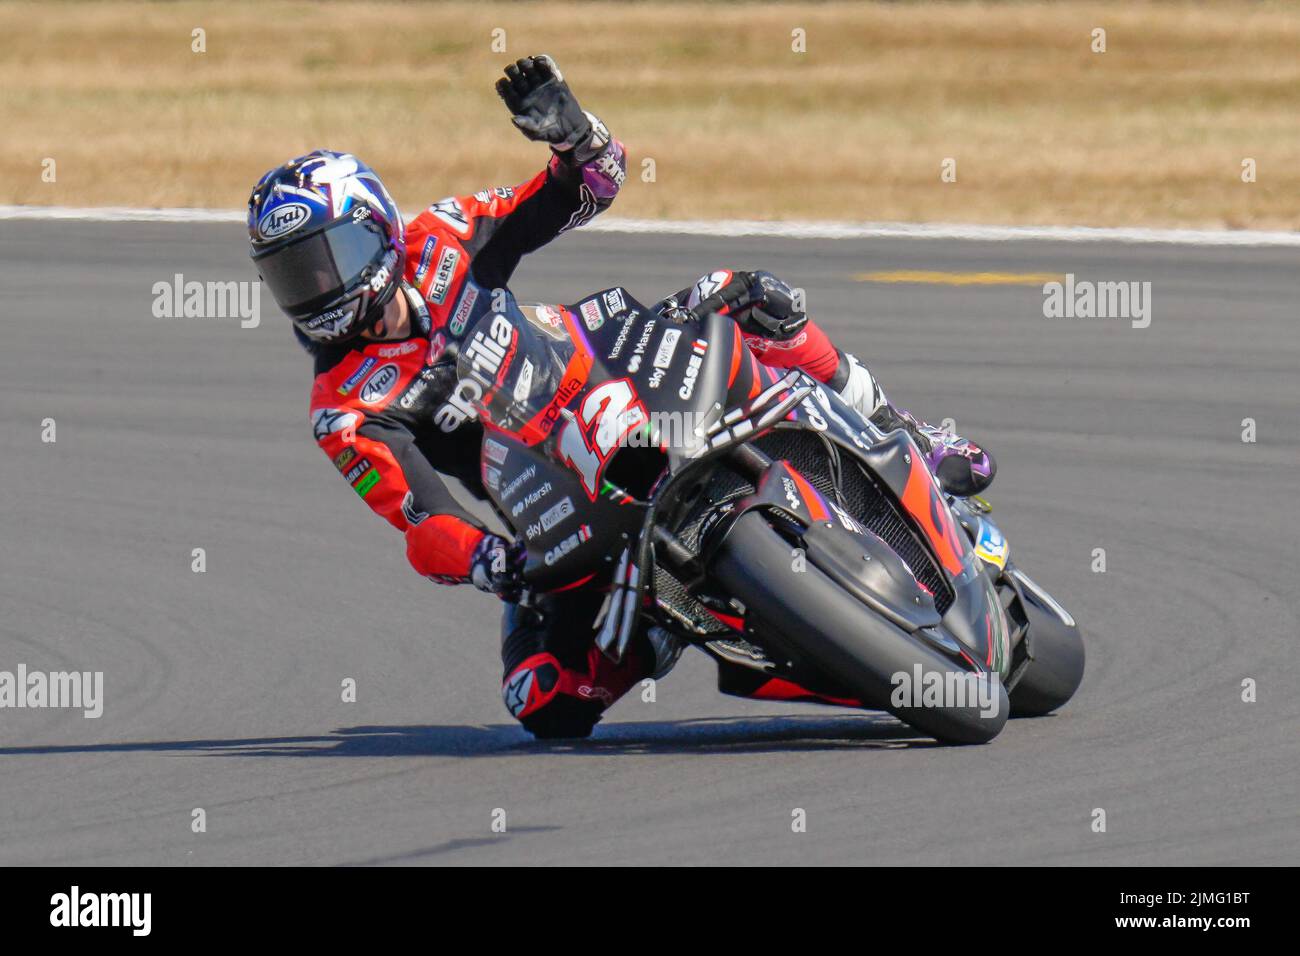 Towcester, UK. 06th Aug, 2022. Maverick VINALES (Spain) of the Aprilia Racing Team after securing second place on the grid during the 2022 Monster Energy Grand Prix MotoGP Qualifying sessions at Silverstone Circuit, Towcester, England on the 6th August 2022. Photo by David Horn. Credit: PRiME Media Images/Alamy Live News Stock Photo